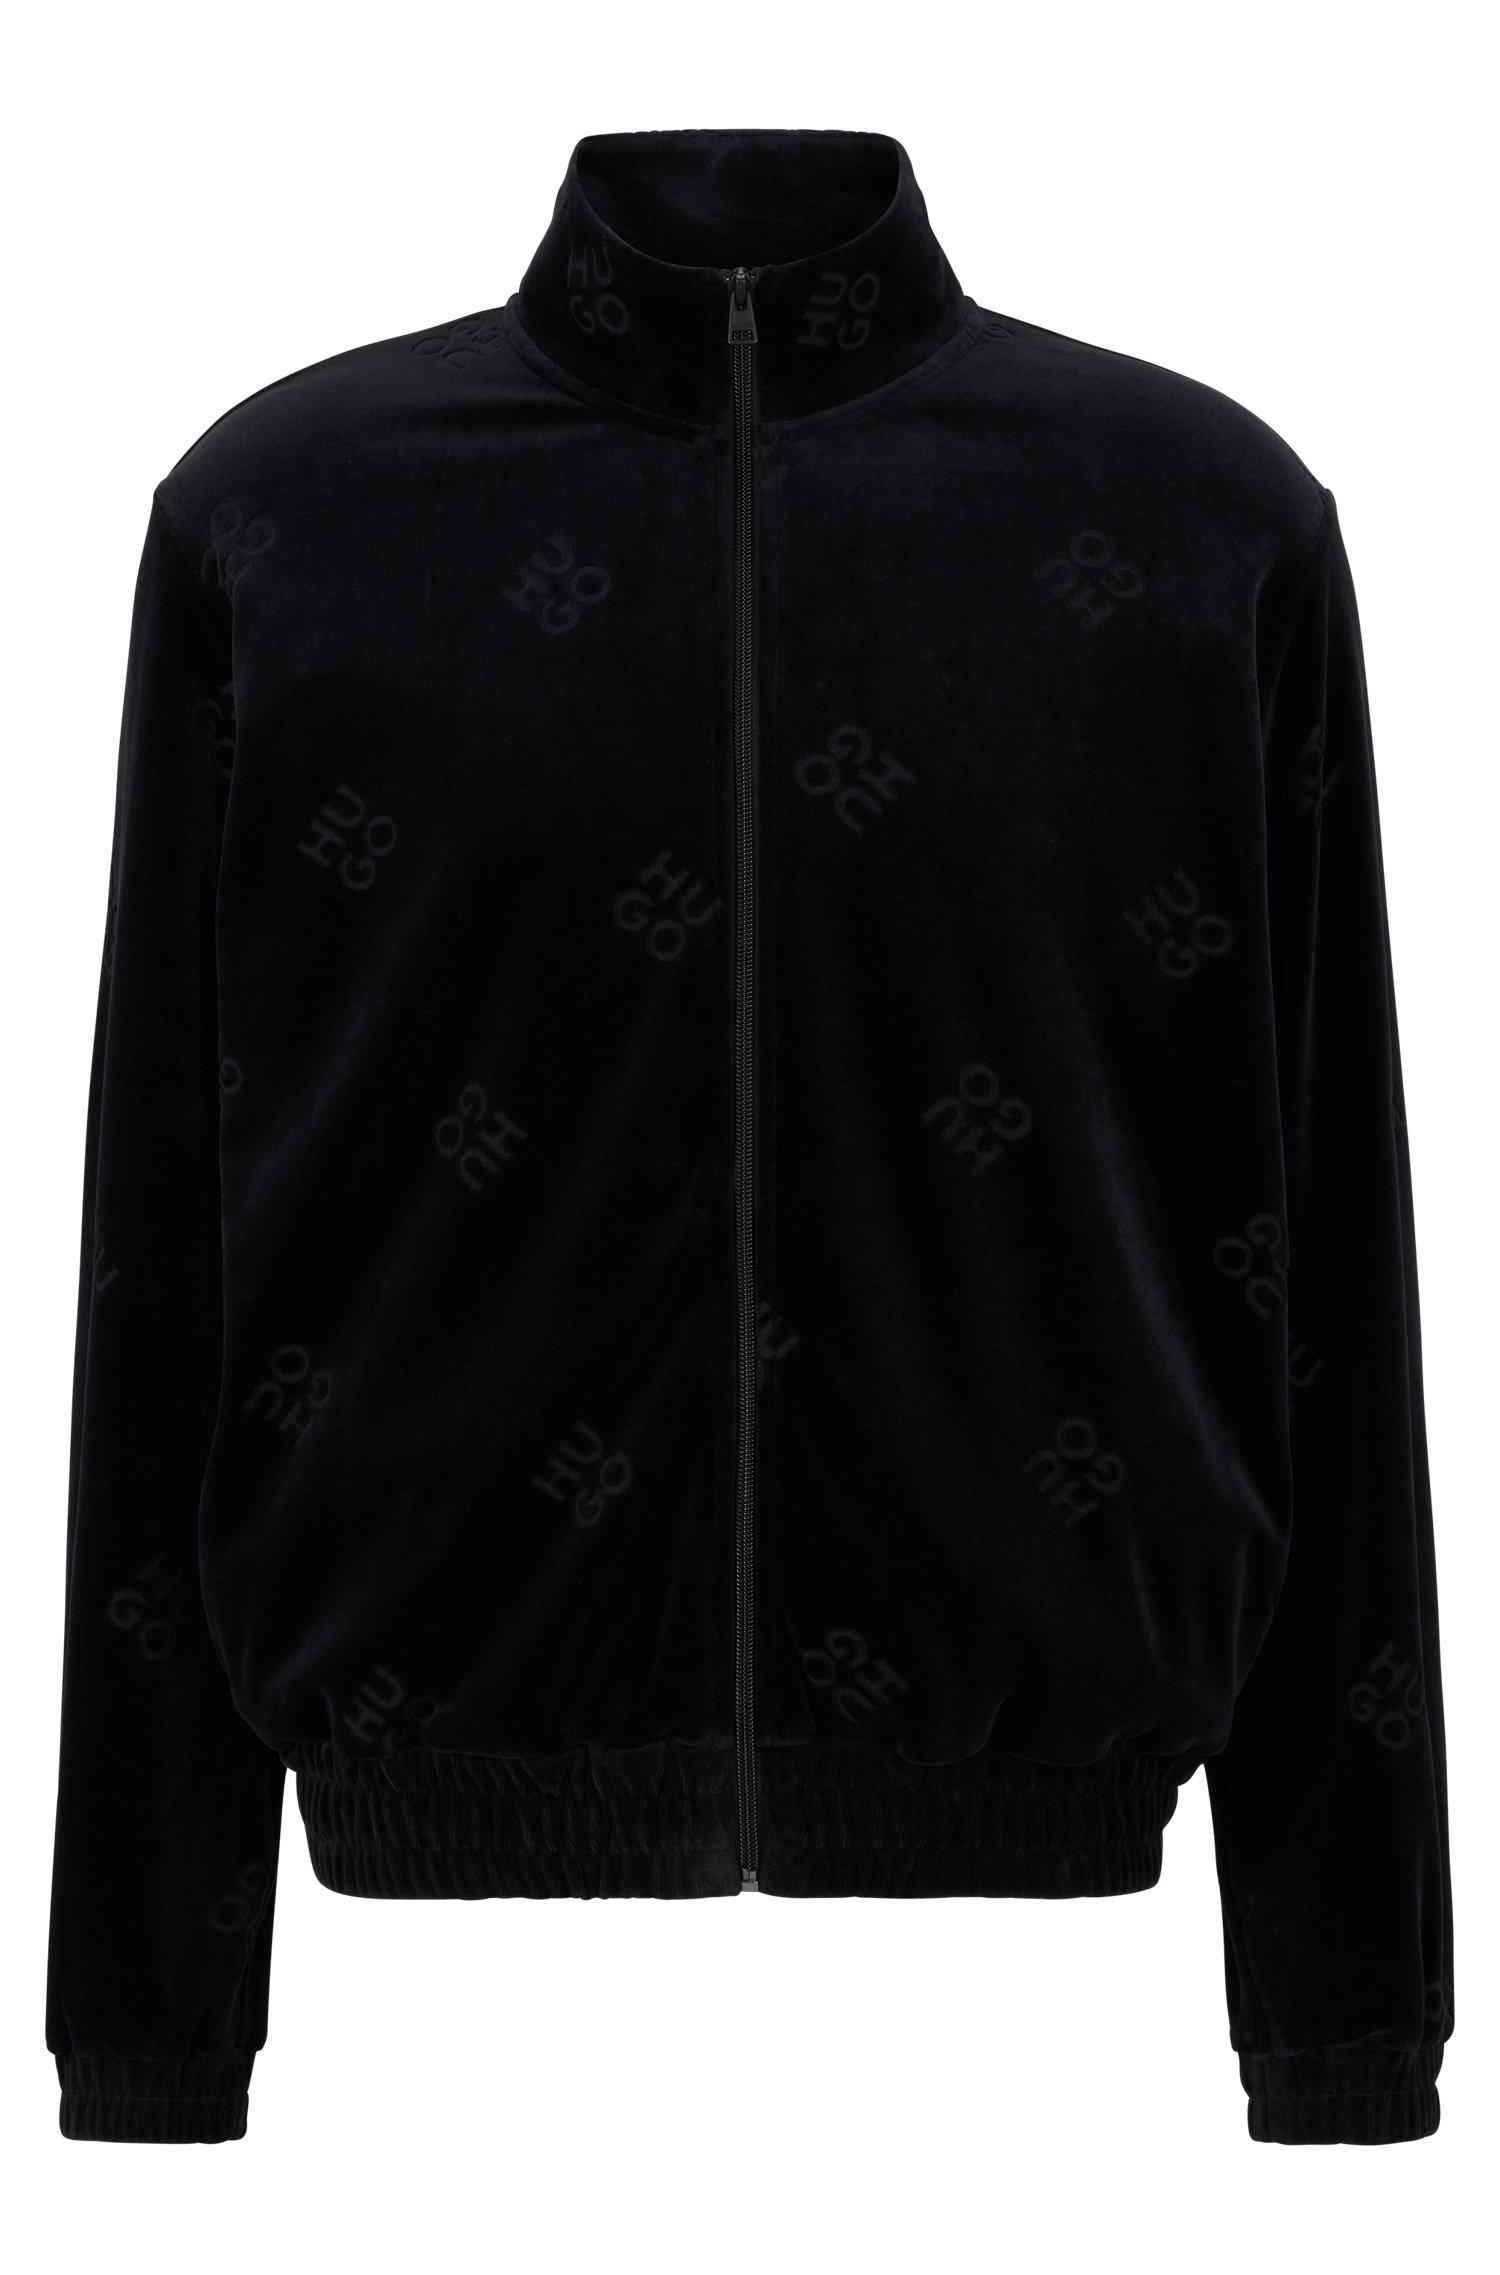 HUGO Relaxed-fit Zip-up Sweatshirt With Stacked Logos in Black for Men ...